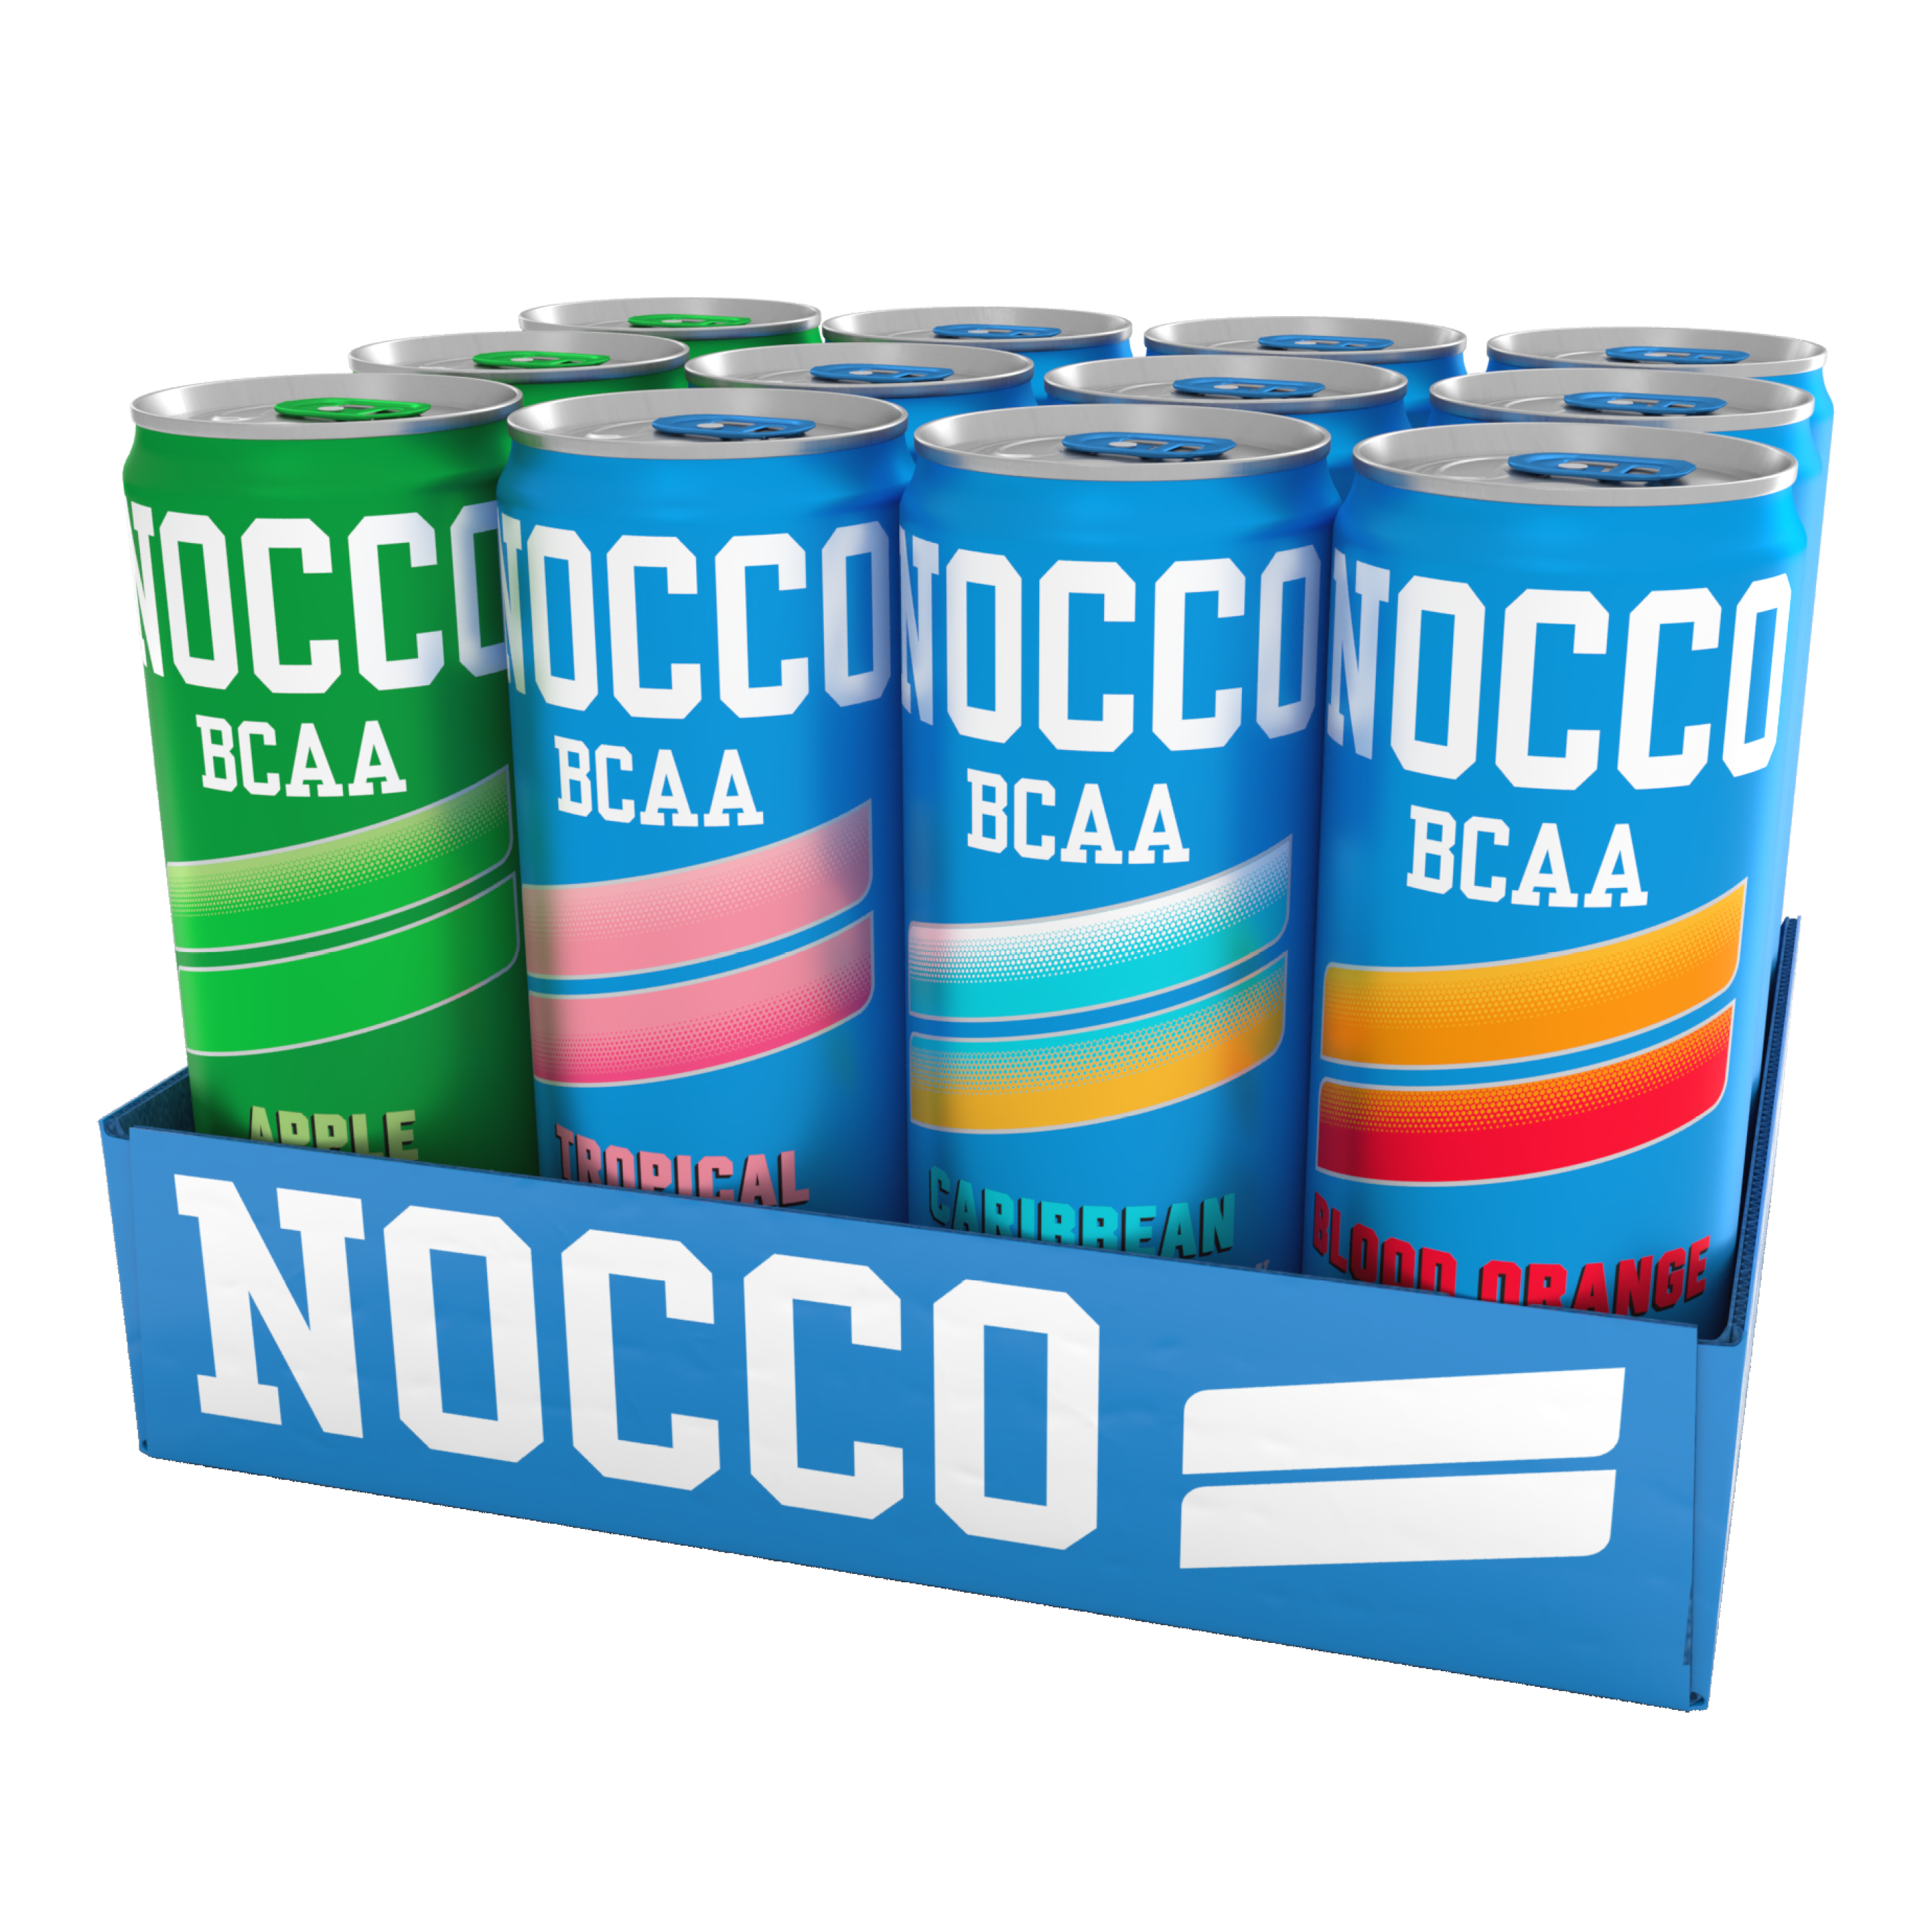 NOCCO Variety pack